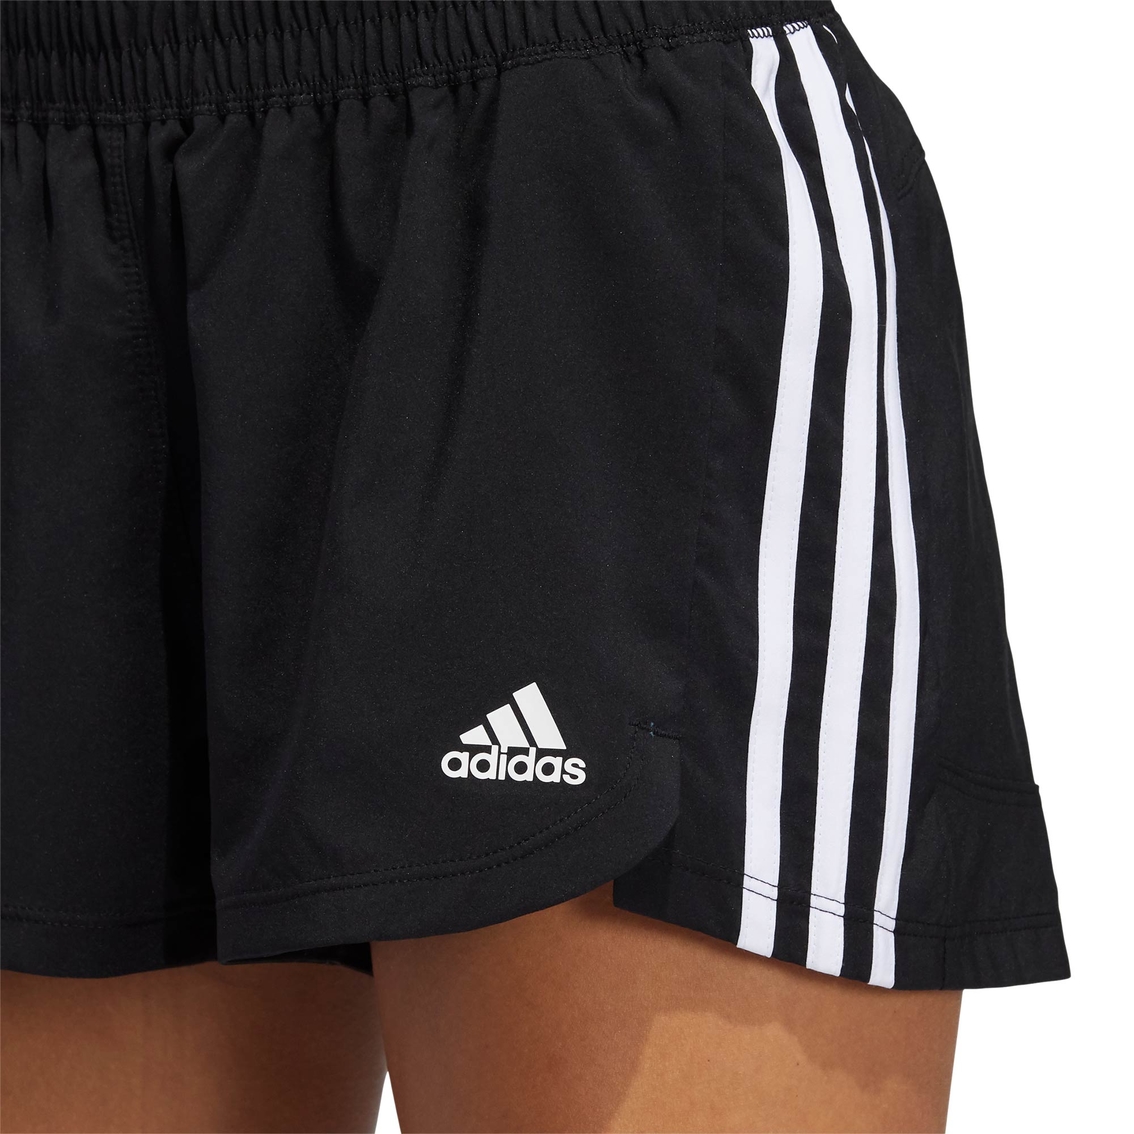 adidas Pacer 3 Stripes Woven Shorts - Image 4 of 6